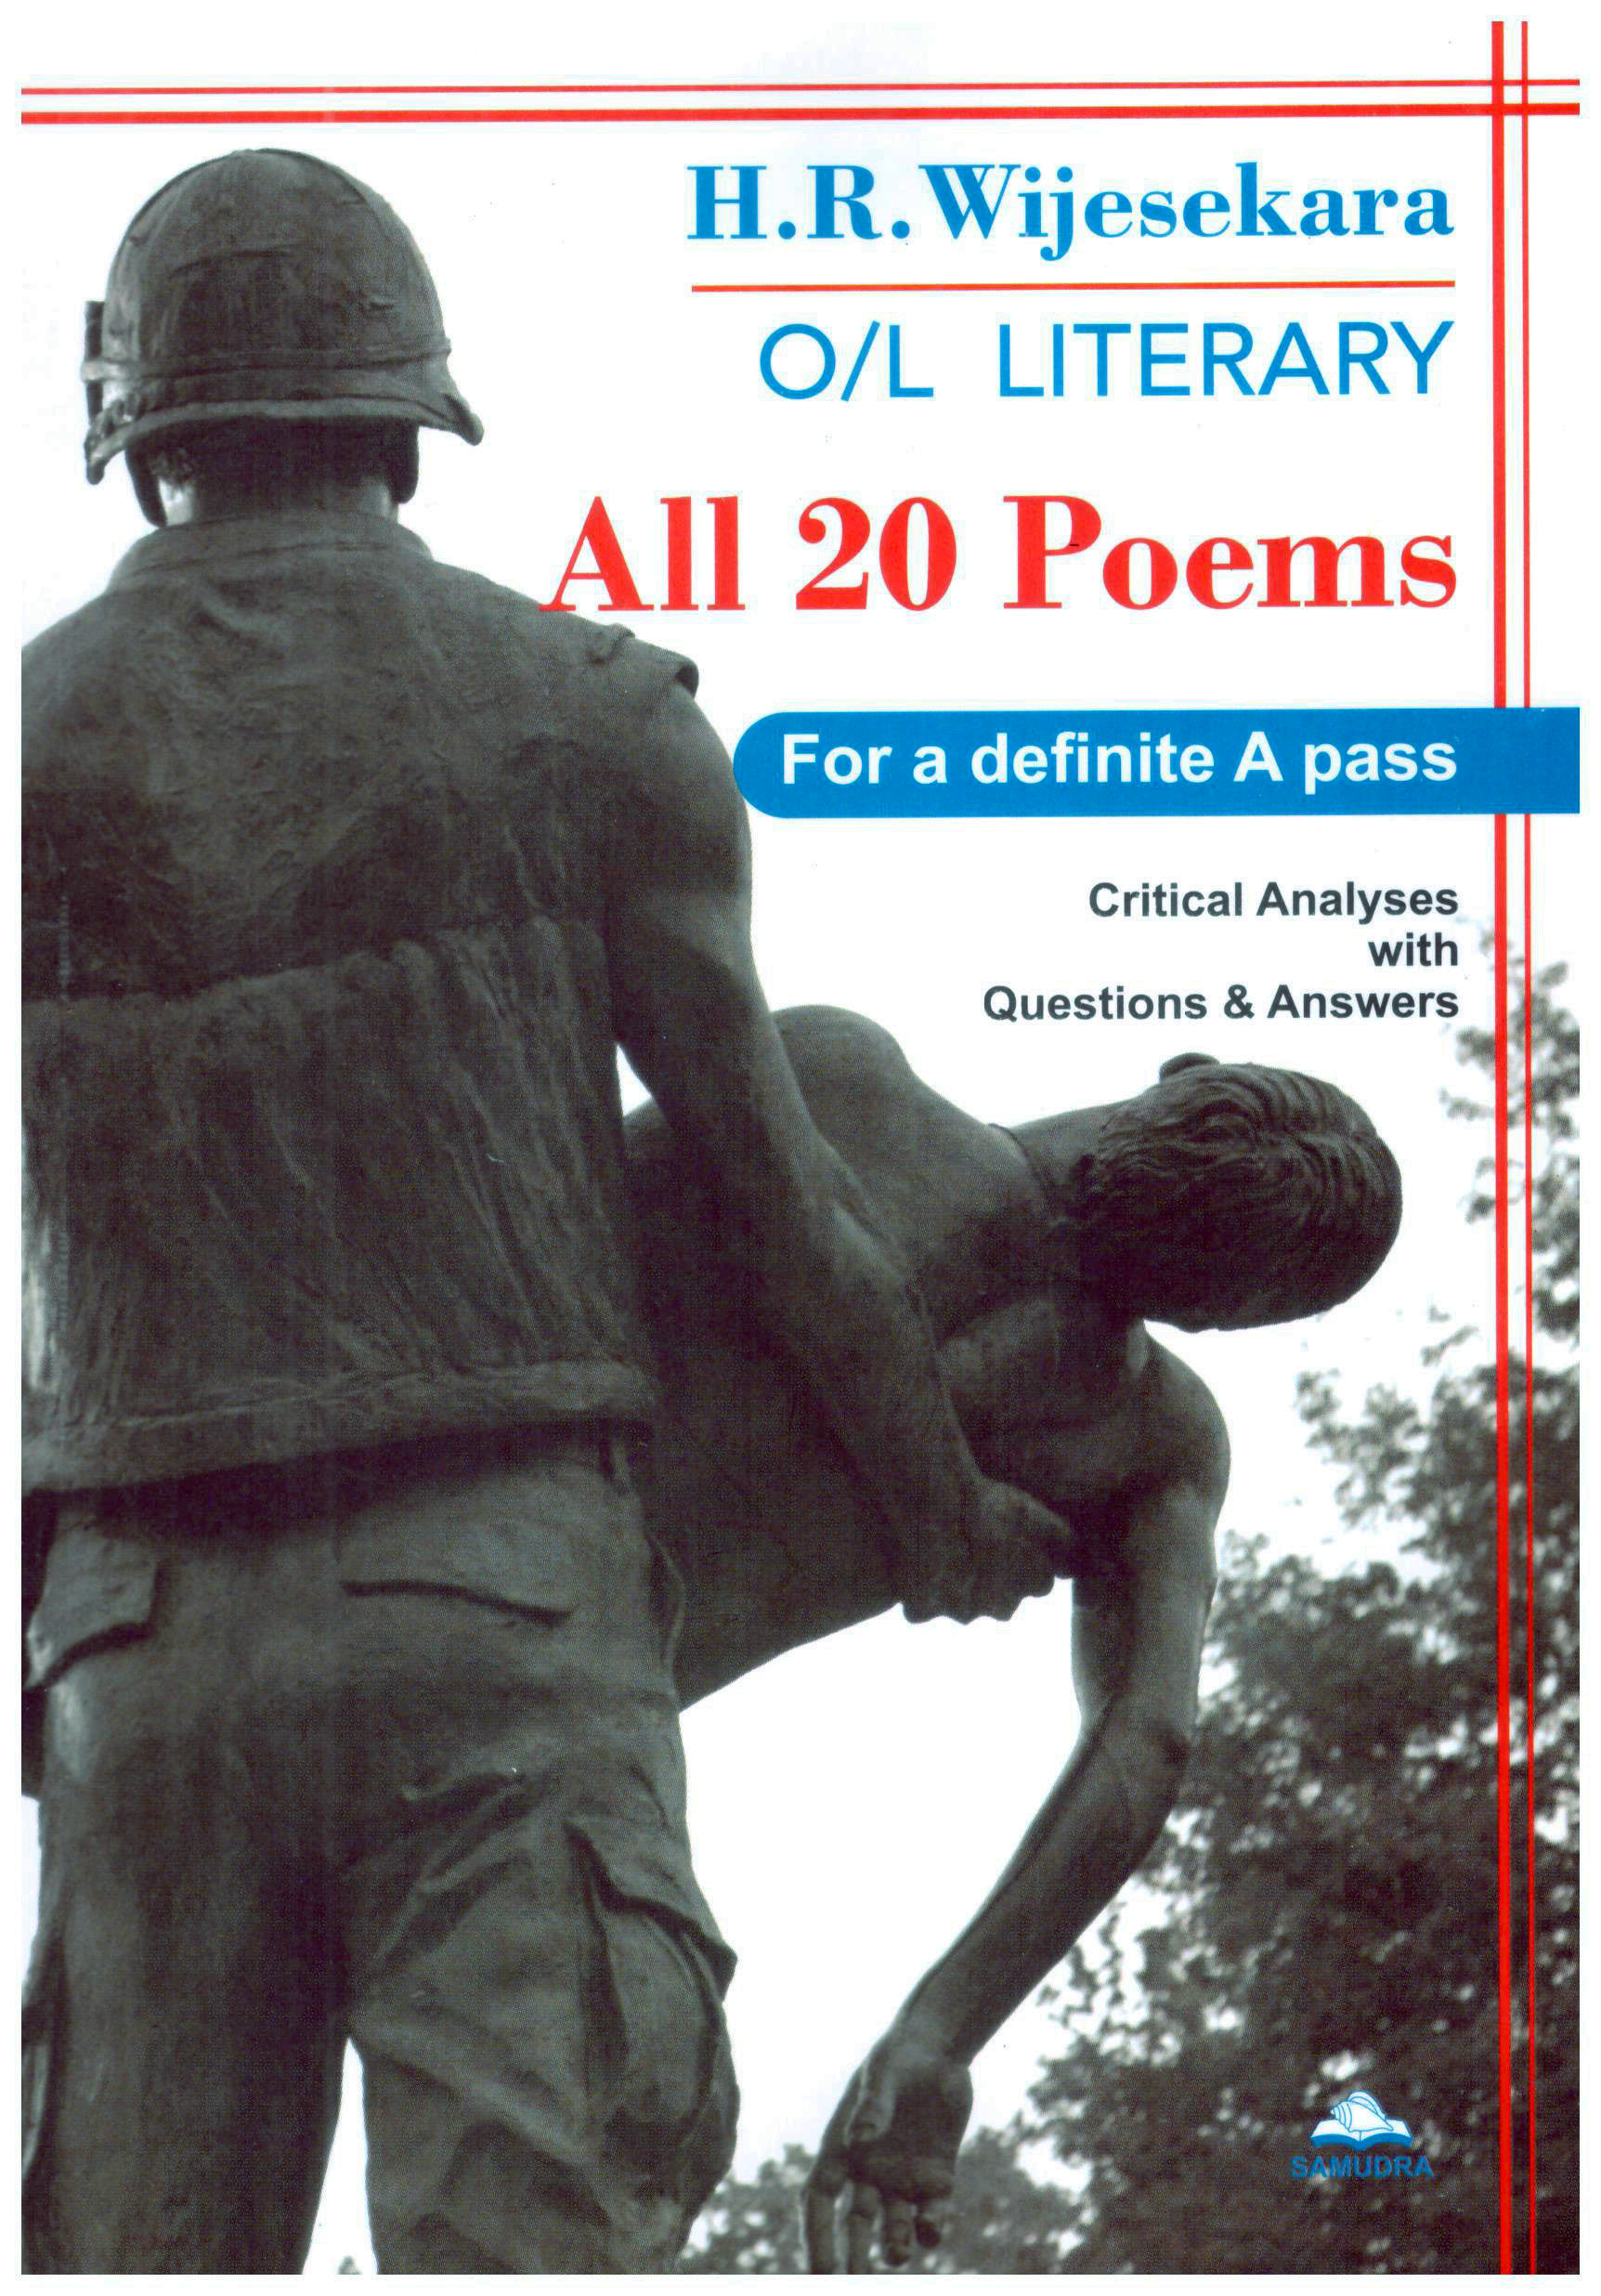 O/L Literary All 20 Poems For Definite A pass